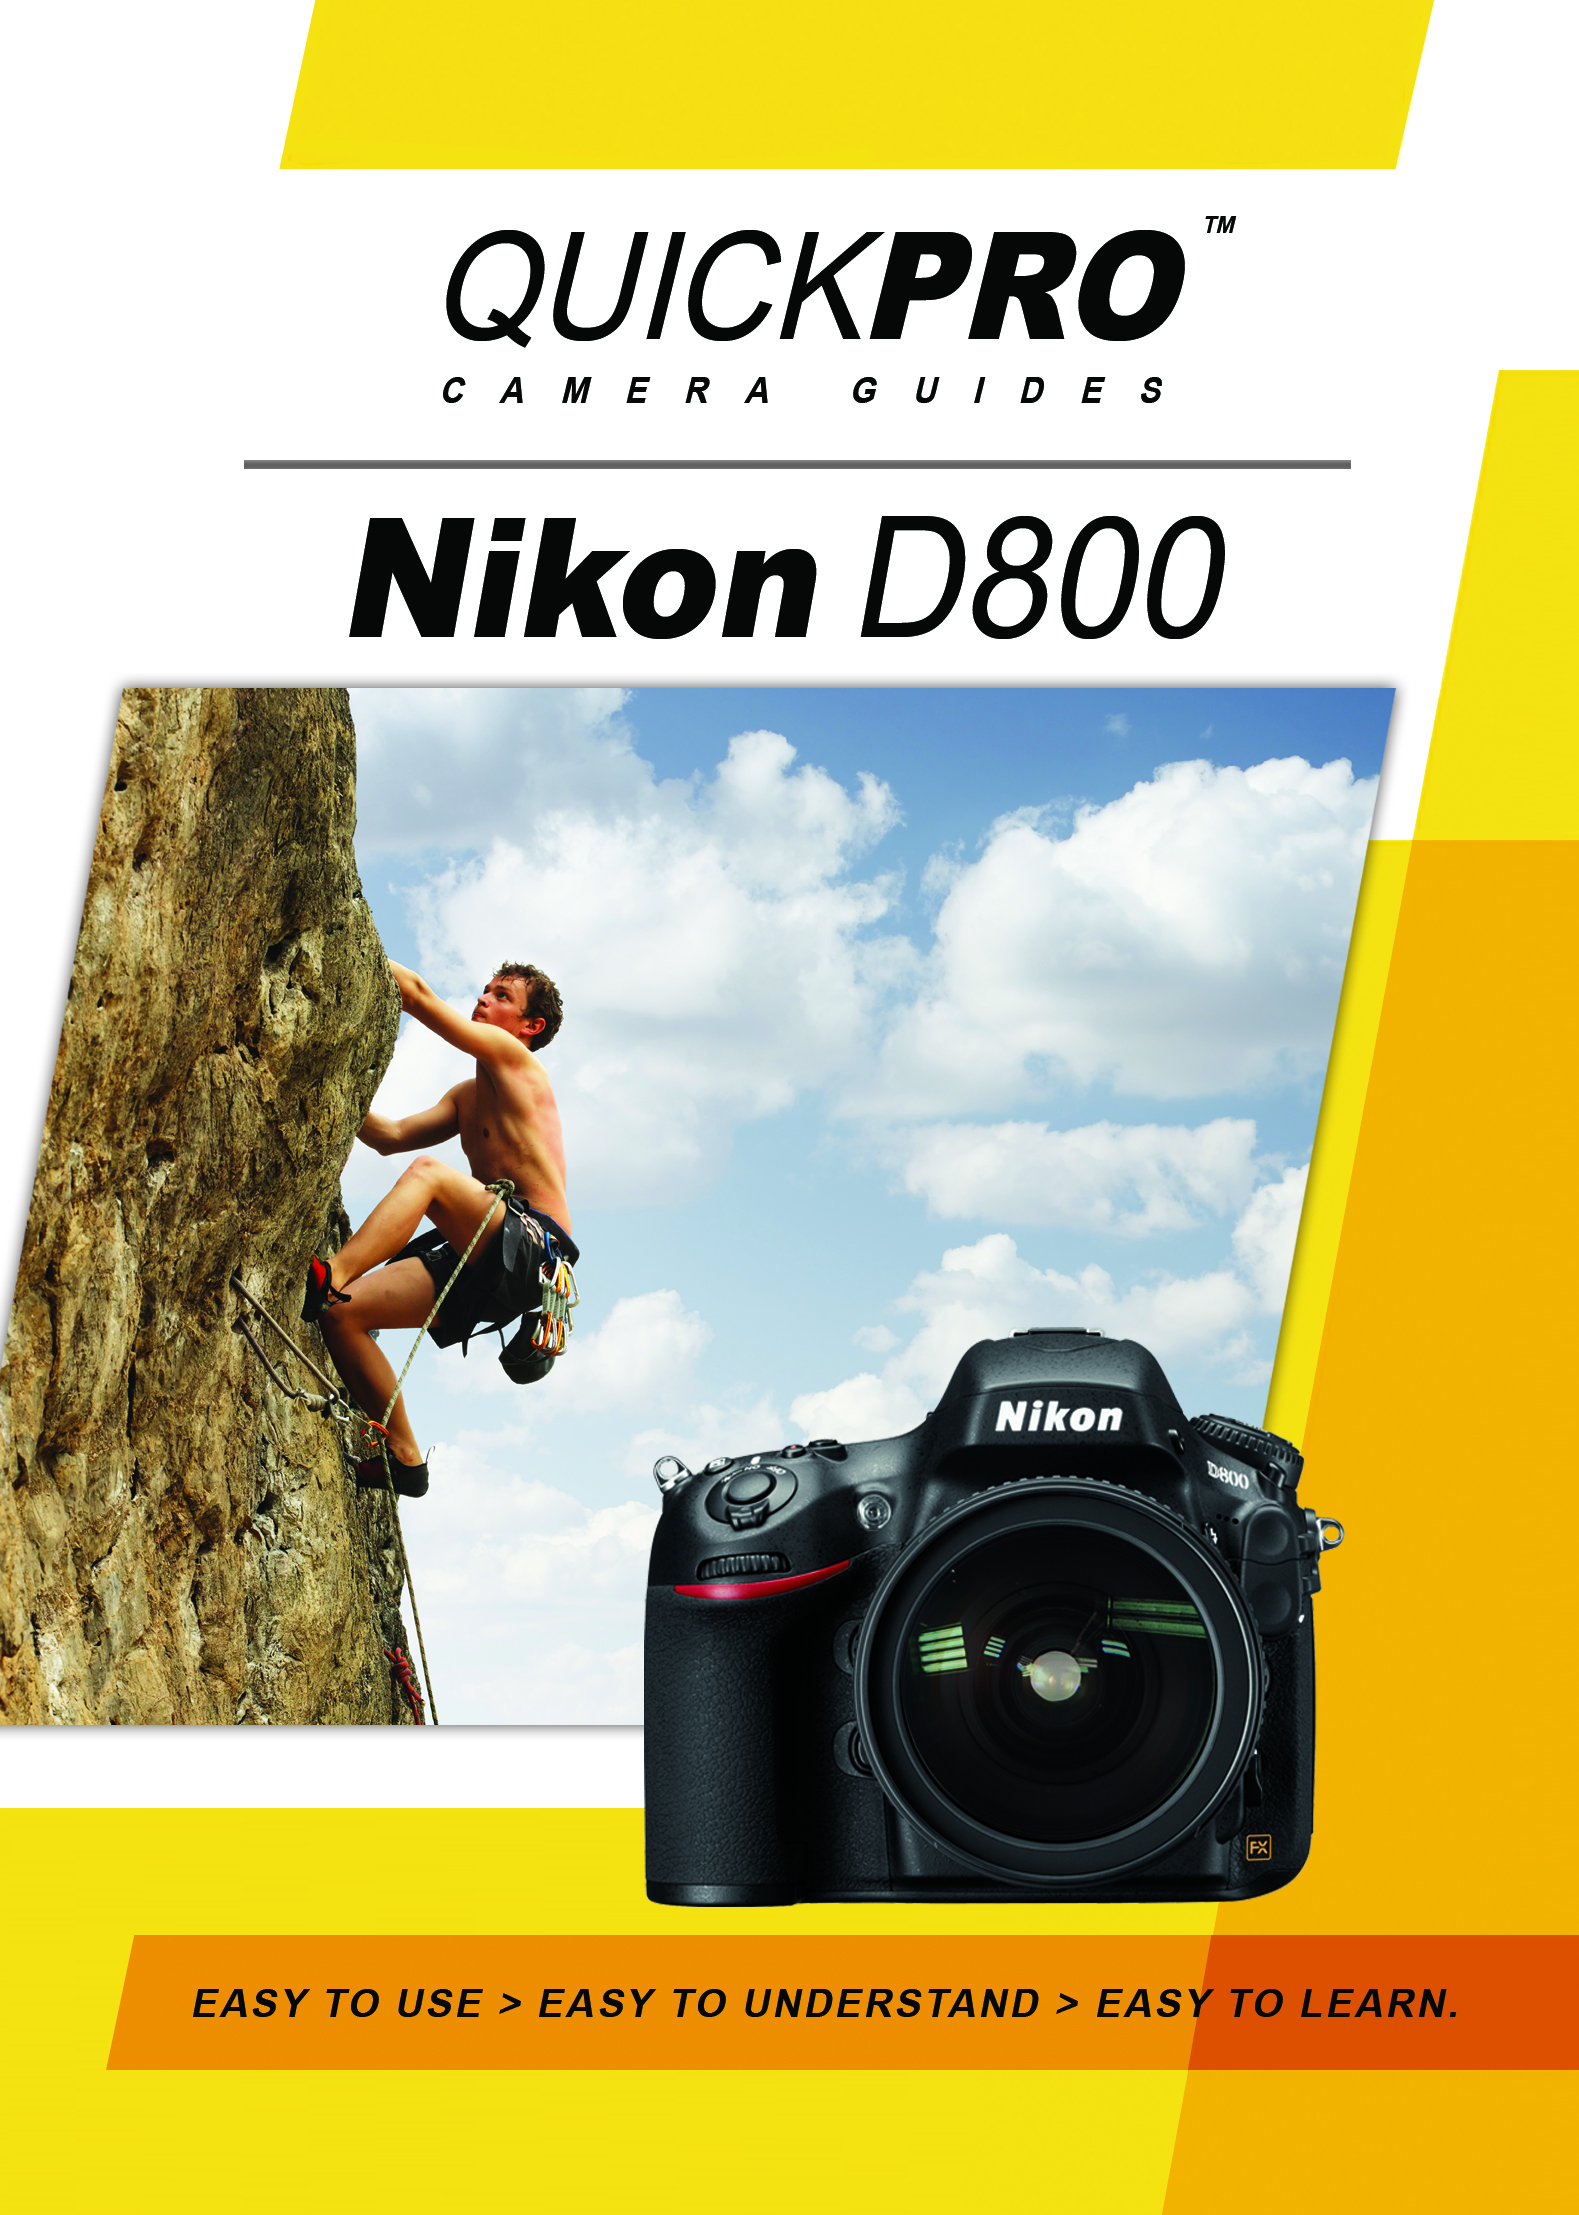 Nikon D800 Instructional Camera Guide By QuickPro | QuickPro Camera Guides